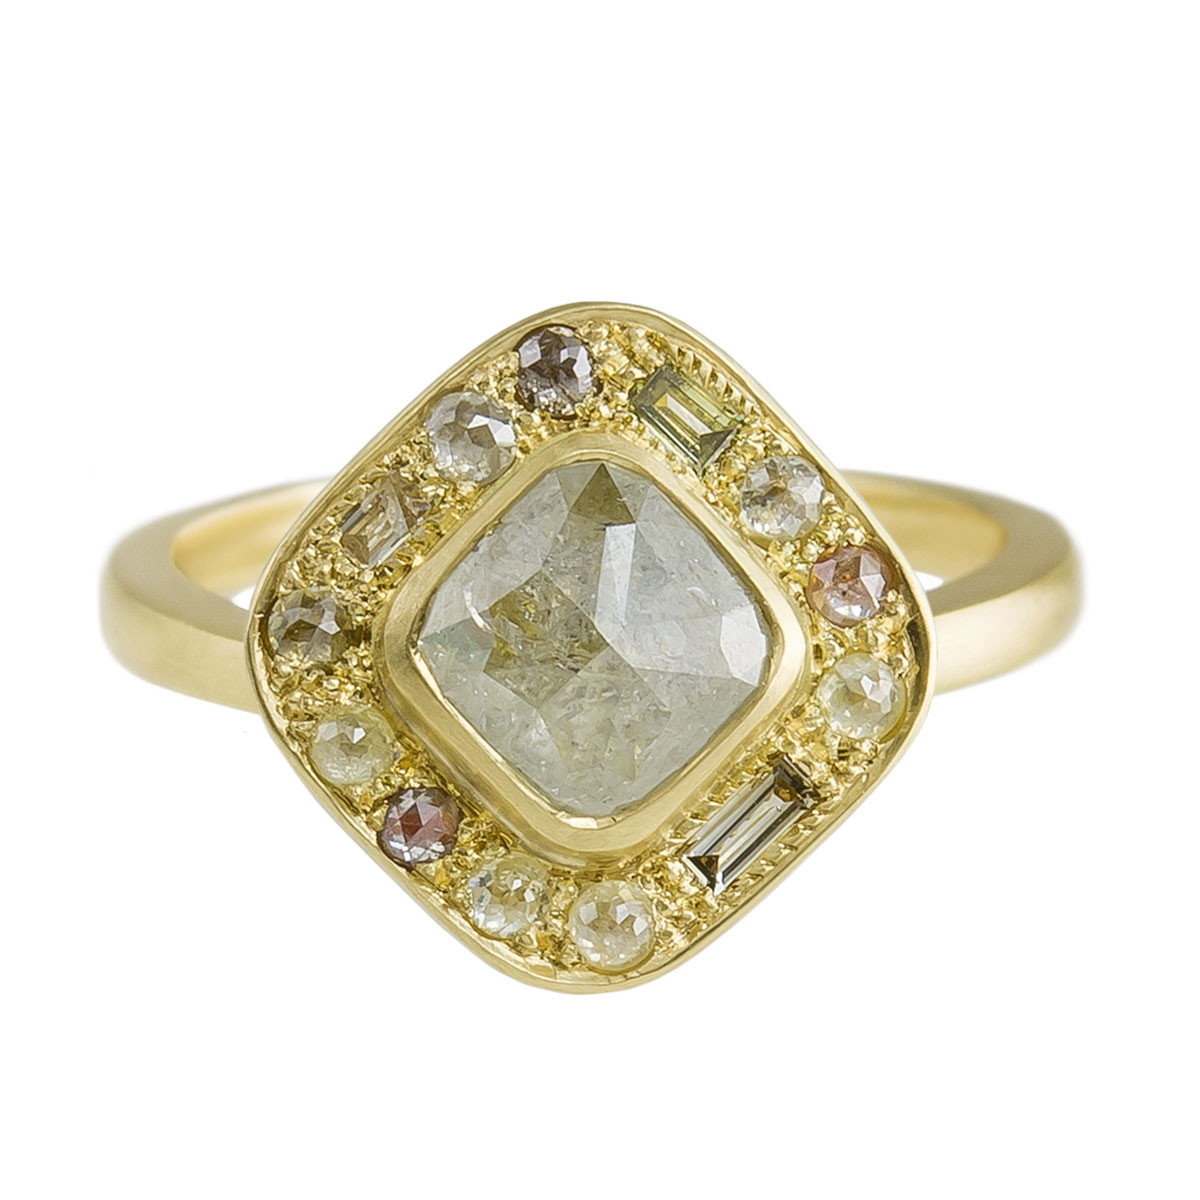 Muse by tomfoolery, 18ct Yellow Gold Puzzle Cushion Rose Cut Diamond Ring, Tomfoolery